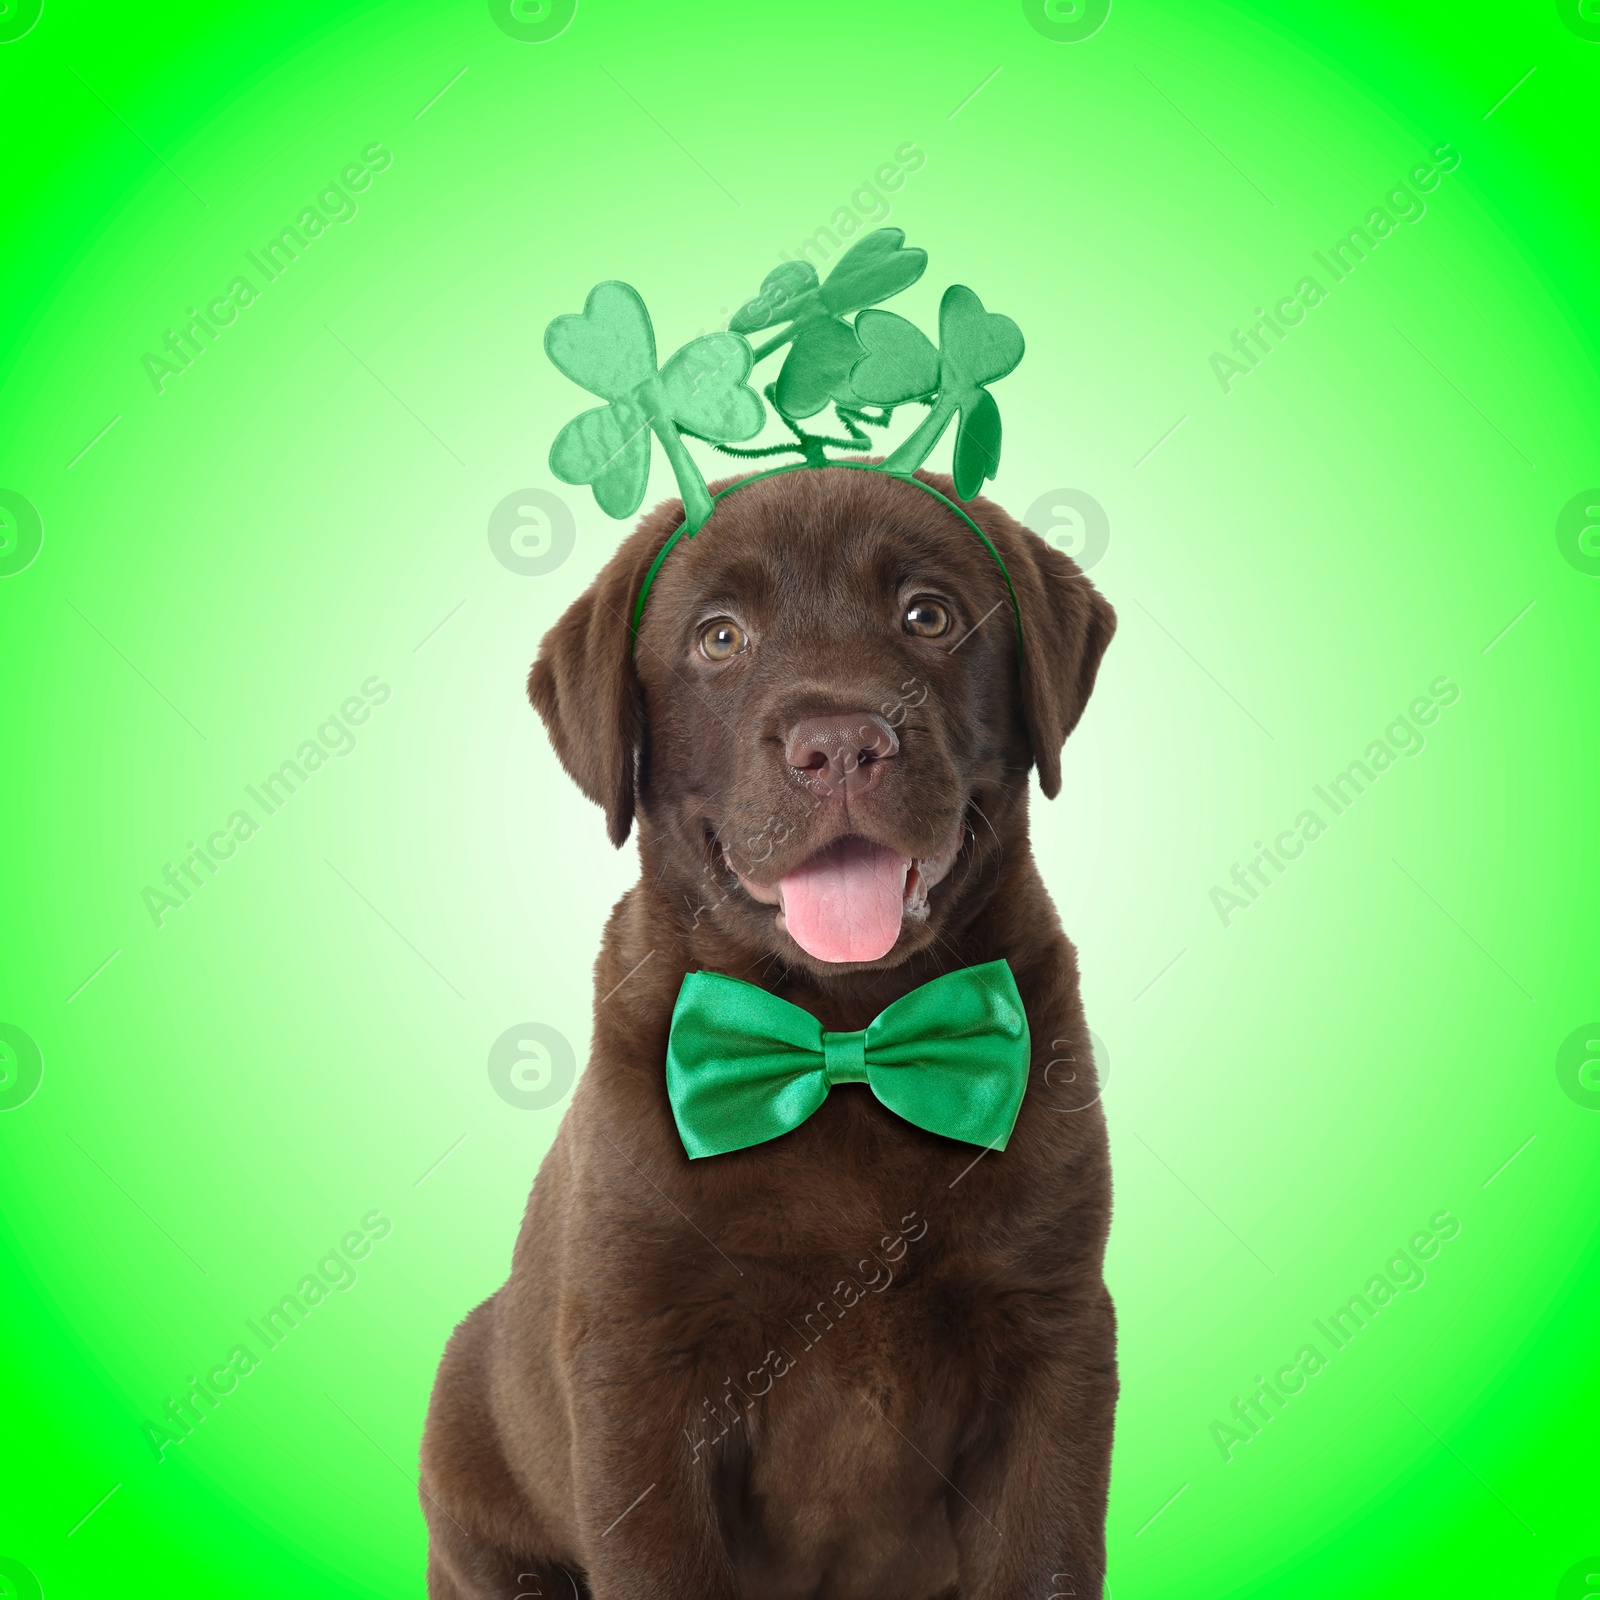 Image of St. Patrick's day celebration. Cute Chocolate Labrador puppy wearing headband with clover leaves and bow tie on green background